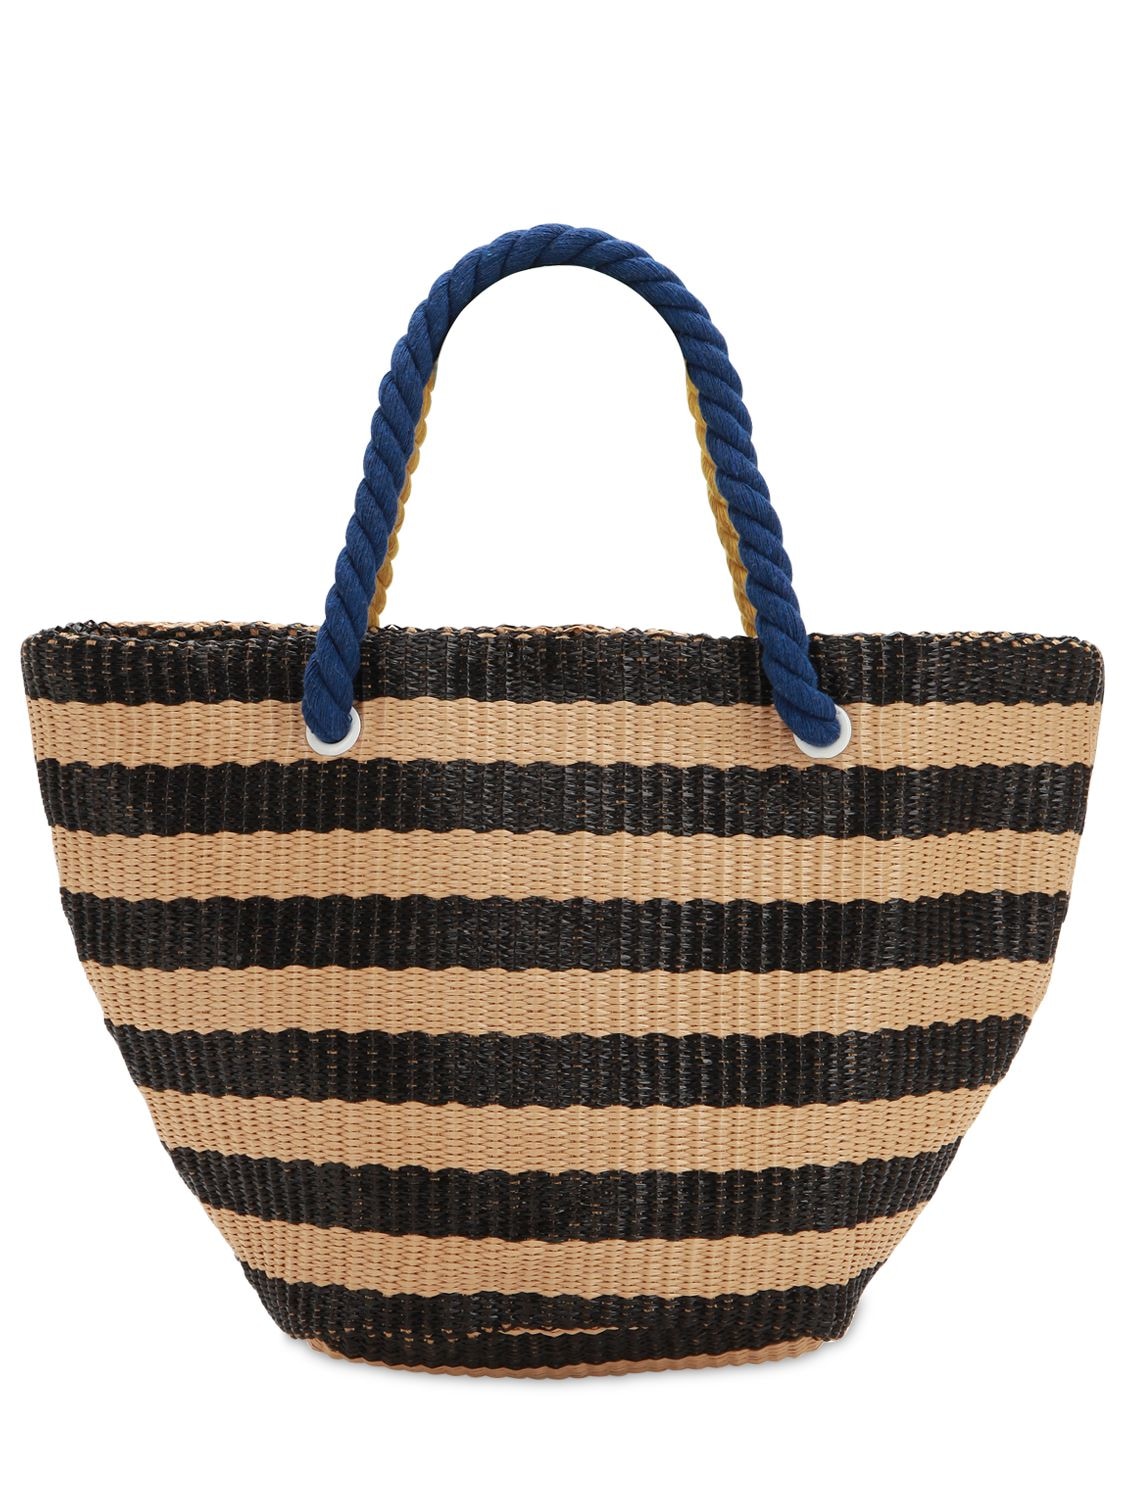 Once Kids' Striped Woven Tote Bag In Natural